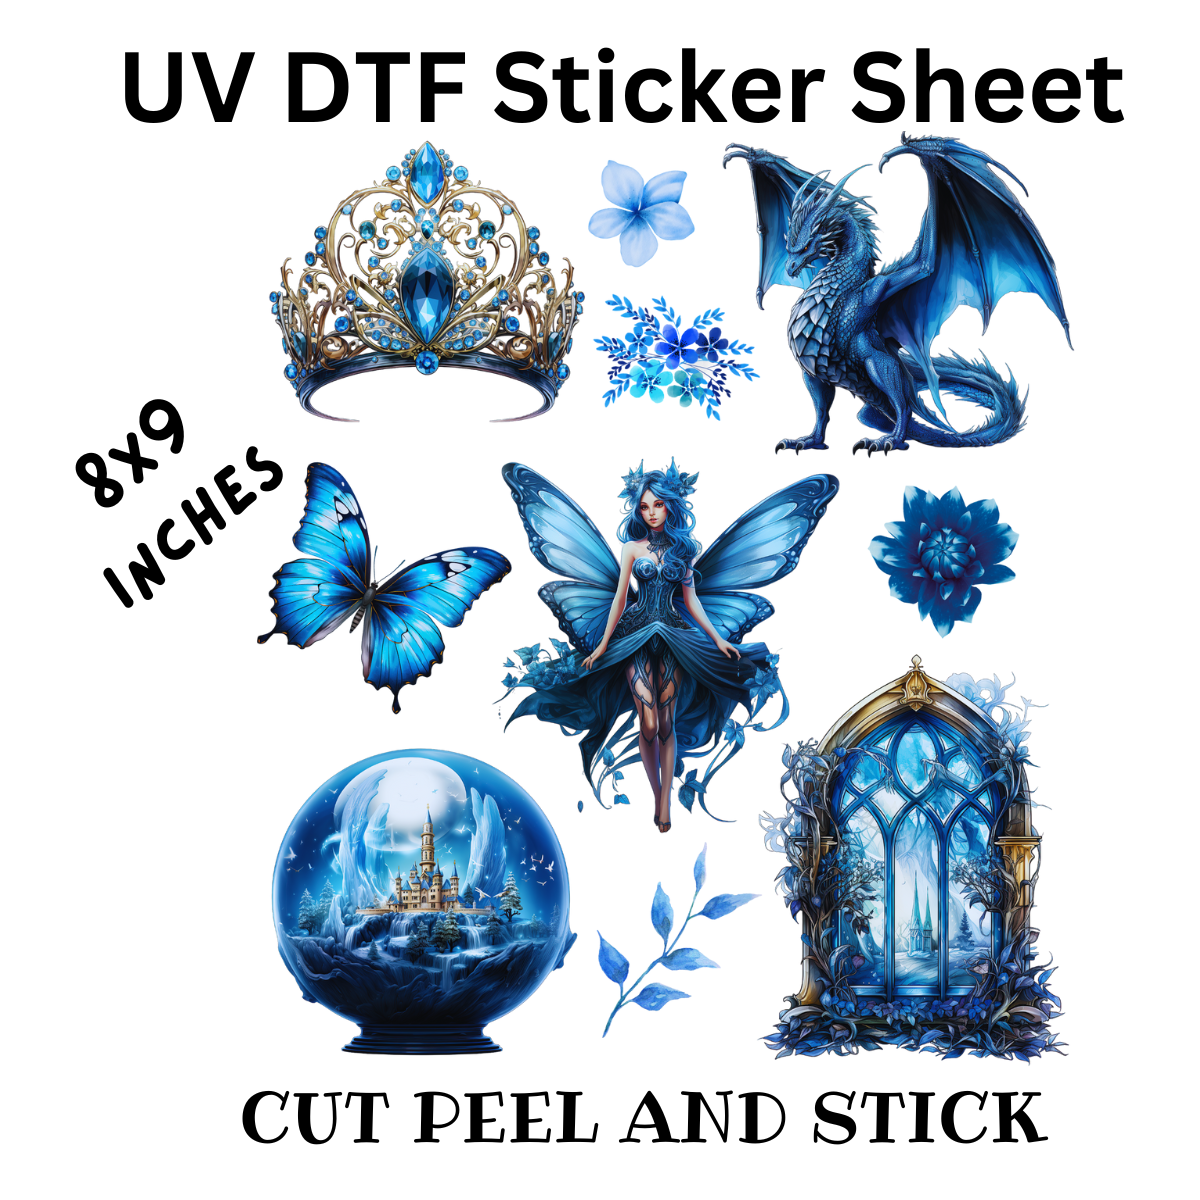 Blue and Magical UV DTF Decal Sticker Sheet 8x9 inches